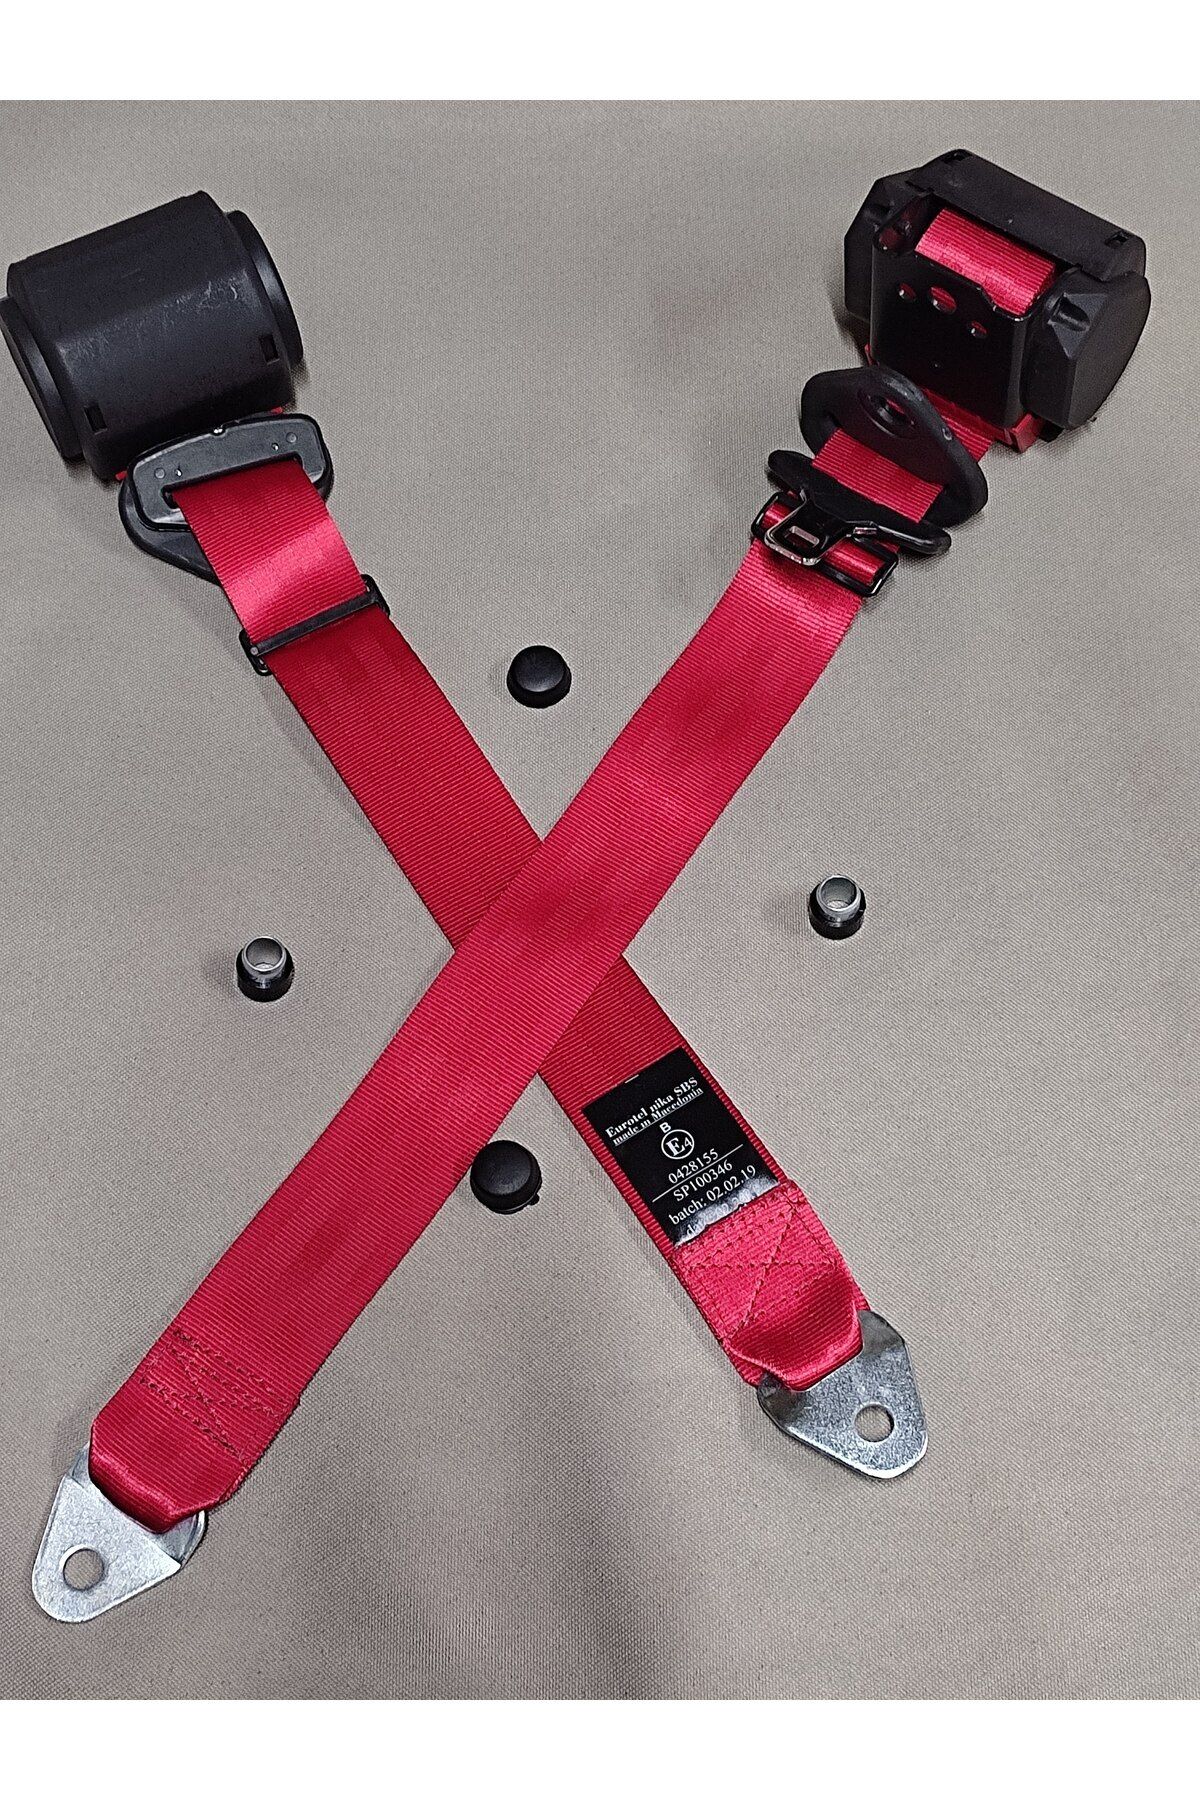 SS Oto Car Seat Belt Red 3 Point Automatic (REEL ONLY) 1 Set 2 Pieces  (Tofaş Şahin KARTAL)